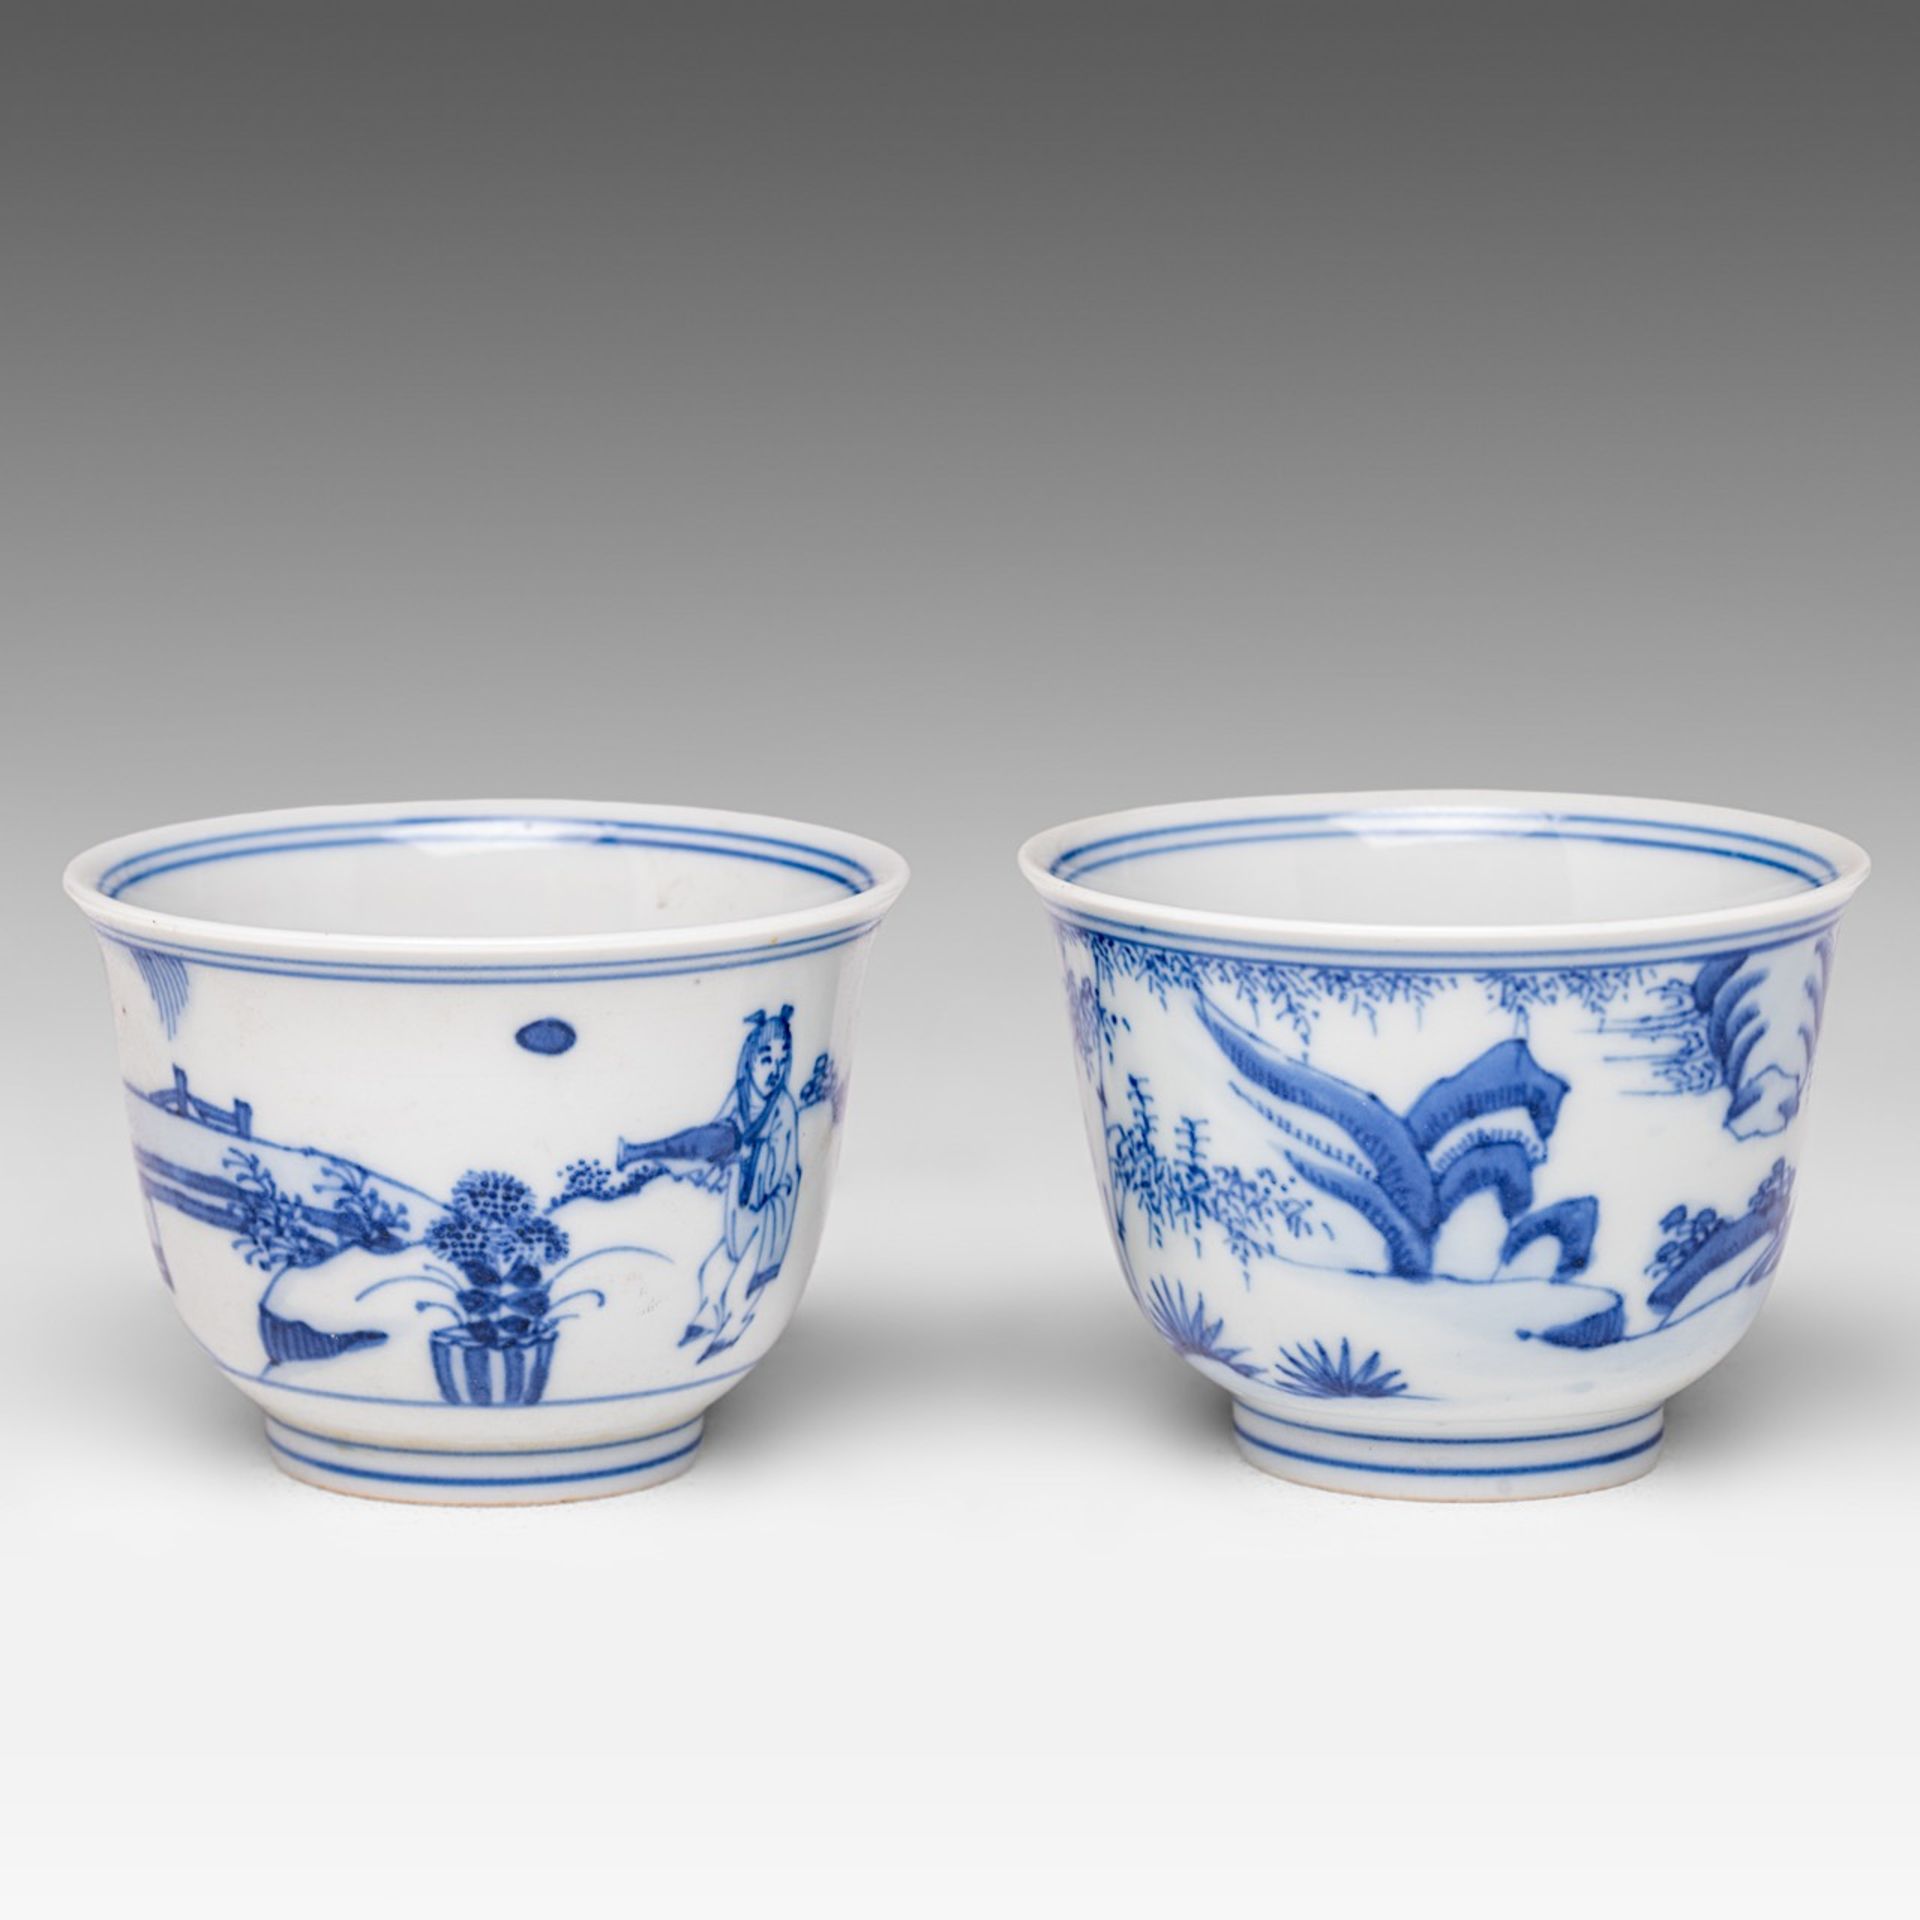 Two Chinese Kangxi style blue and white 'Figural' tea cups, H 6 - dia 8,2 cm - Image 4 of 6